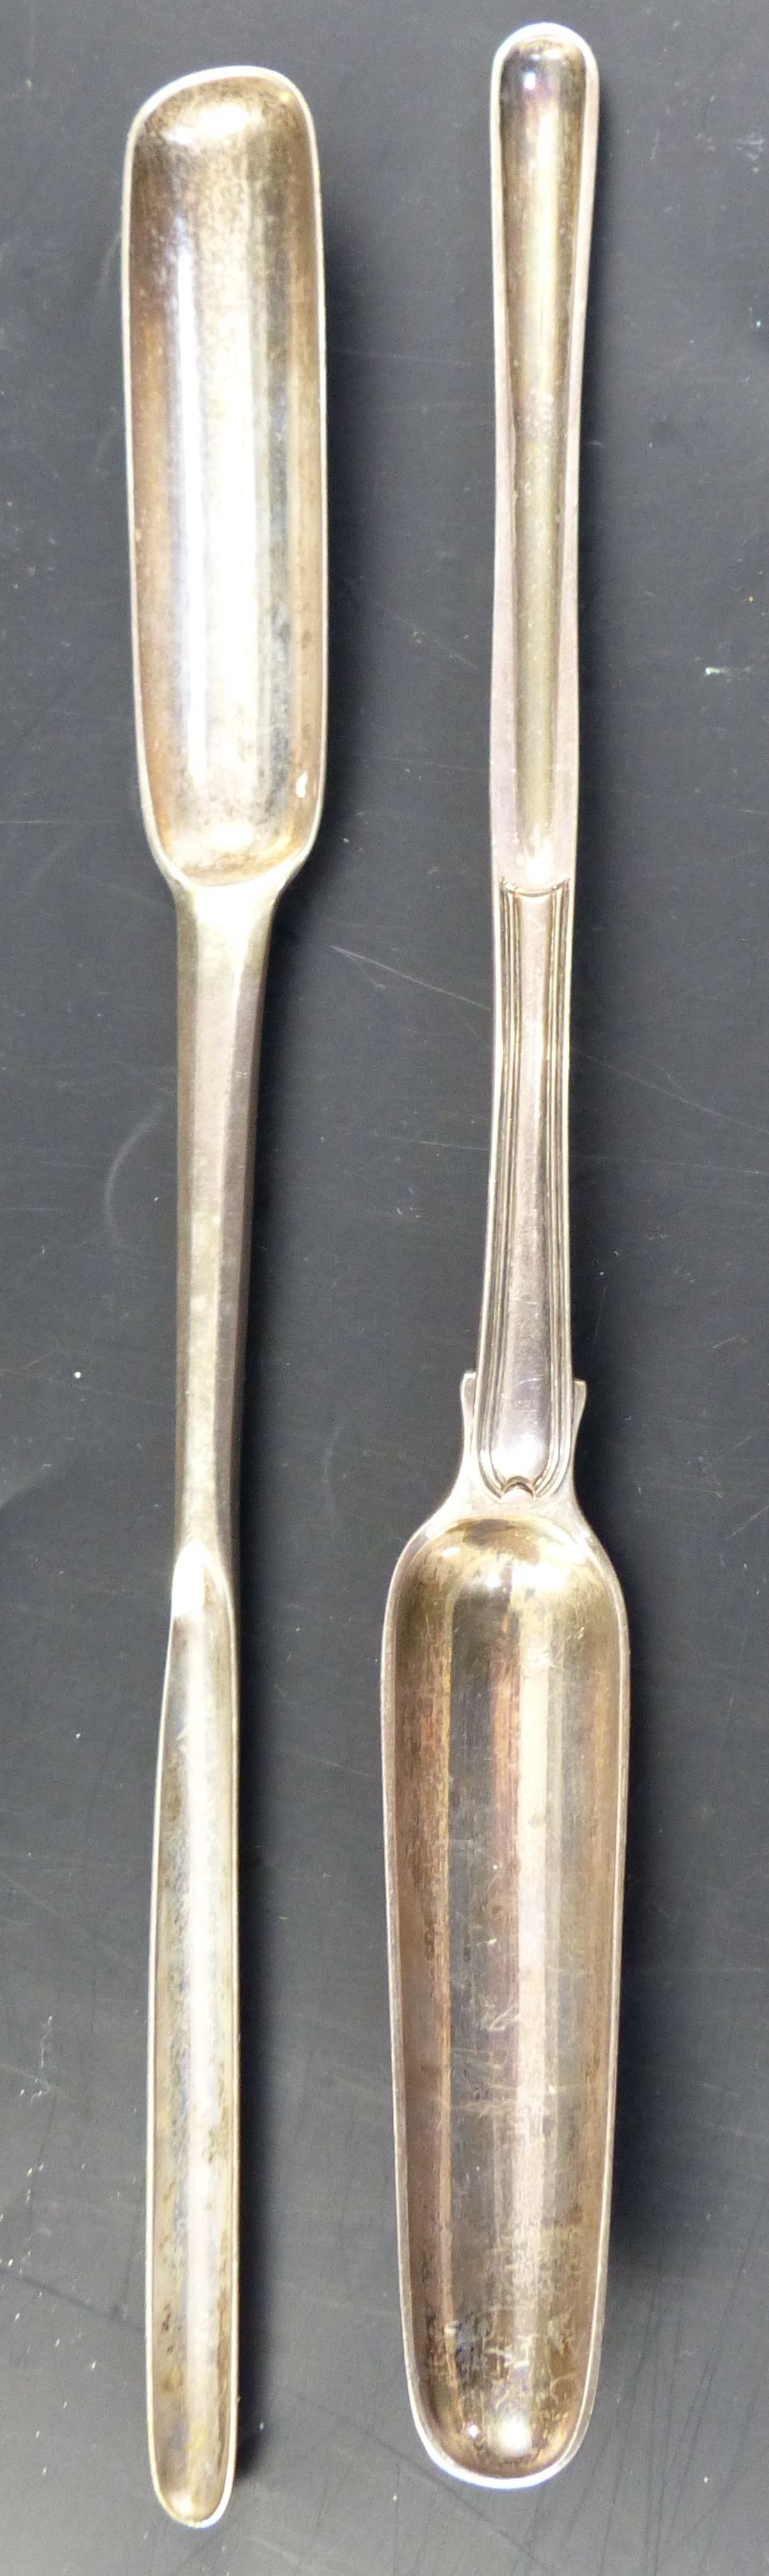 Two 19th century silver marrow scoops, thread pattern by Eley, Fearn & Chawner, London, 1808 and - Image 2 of 7